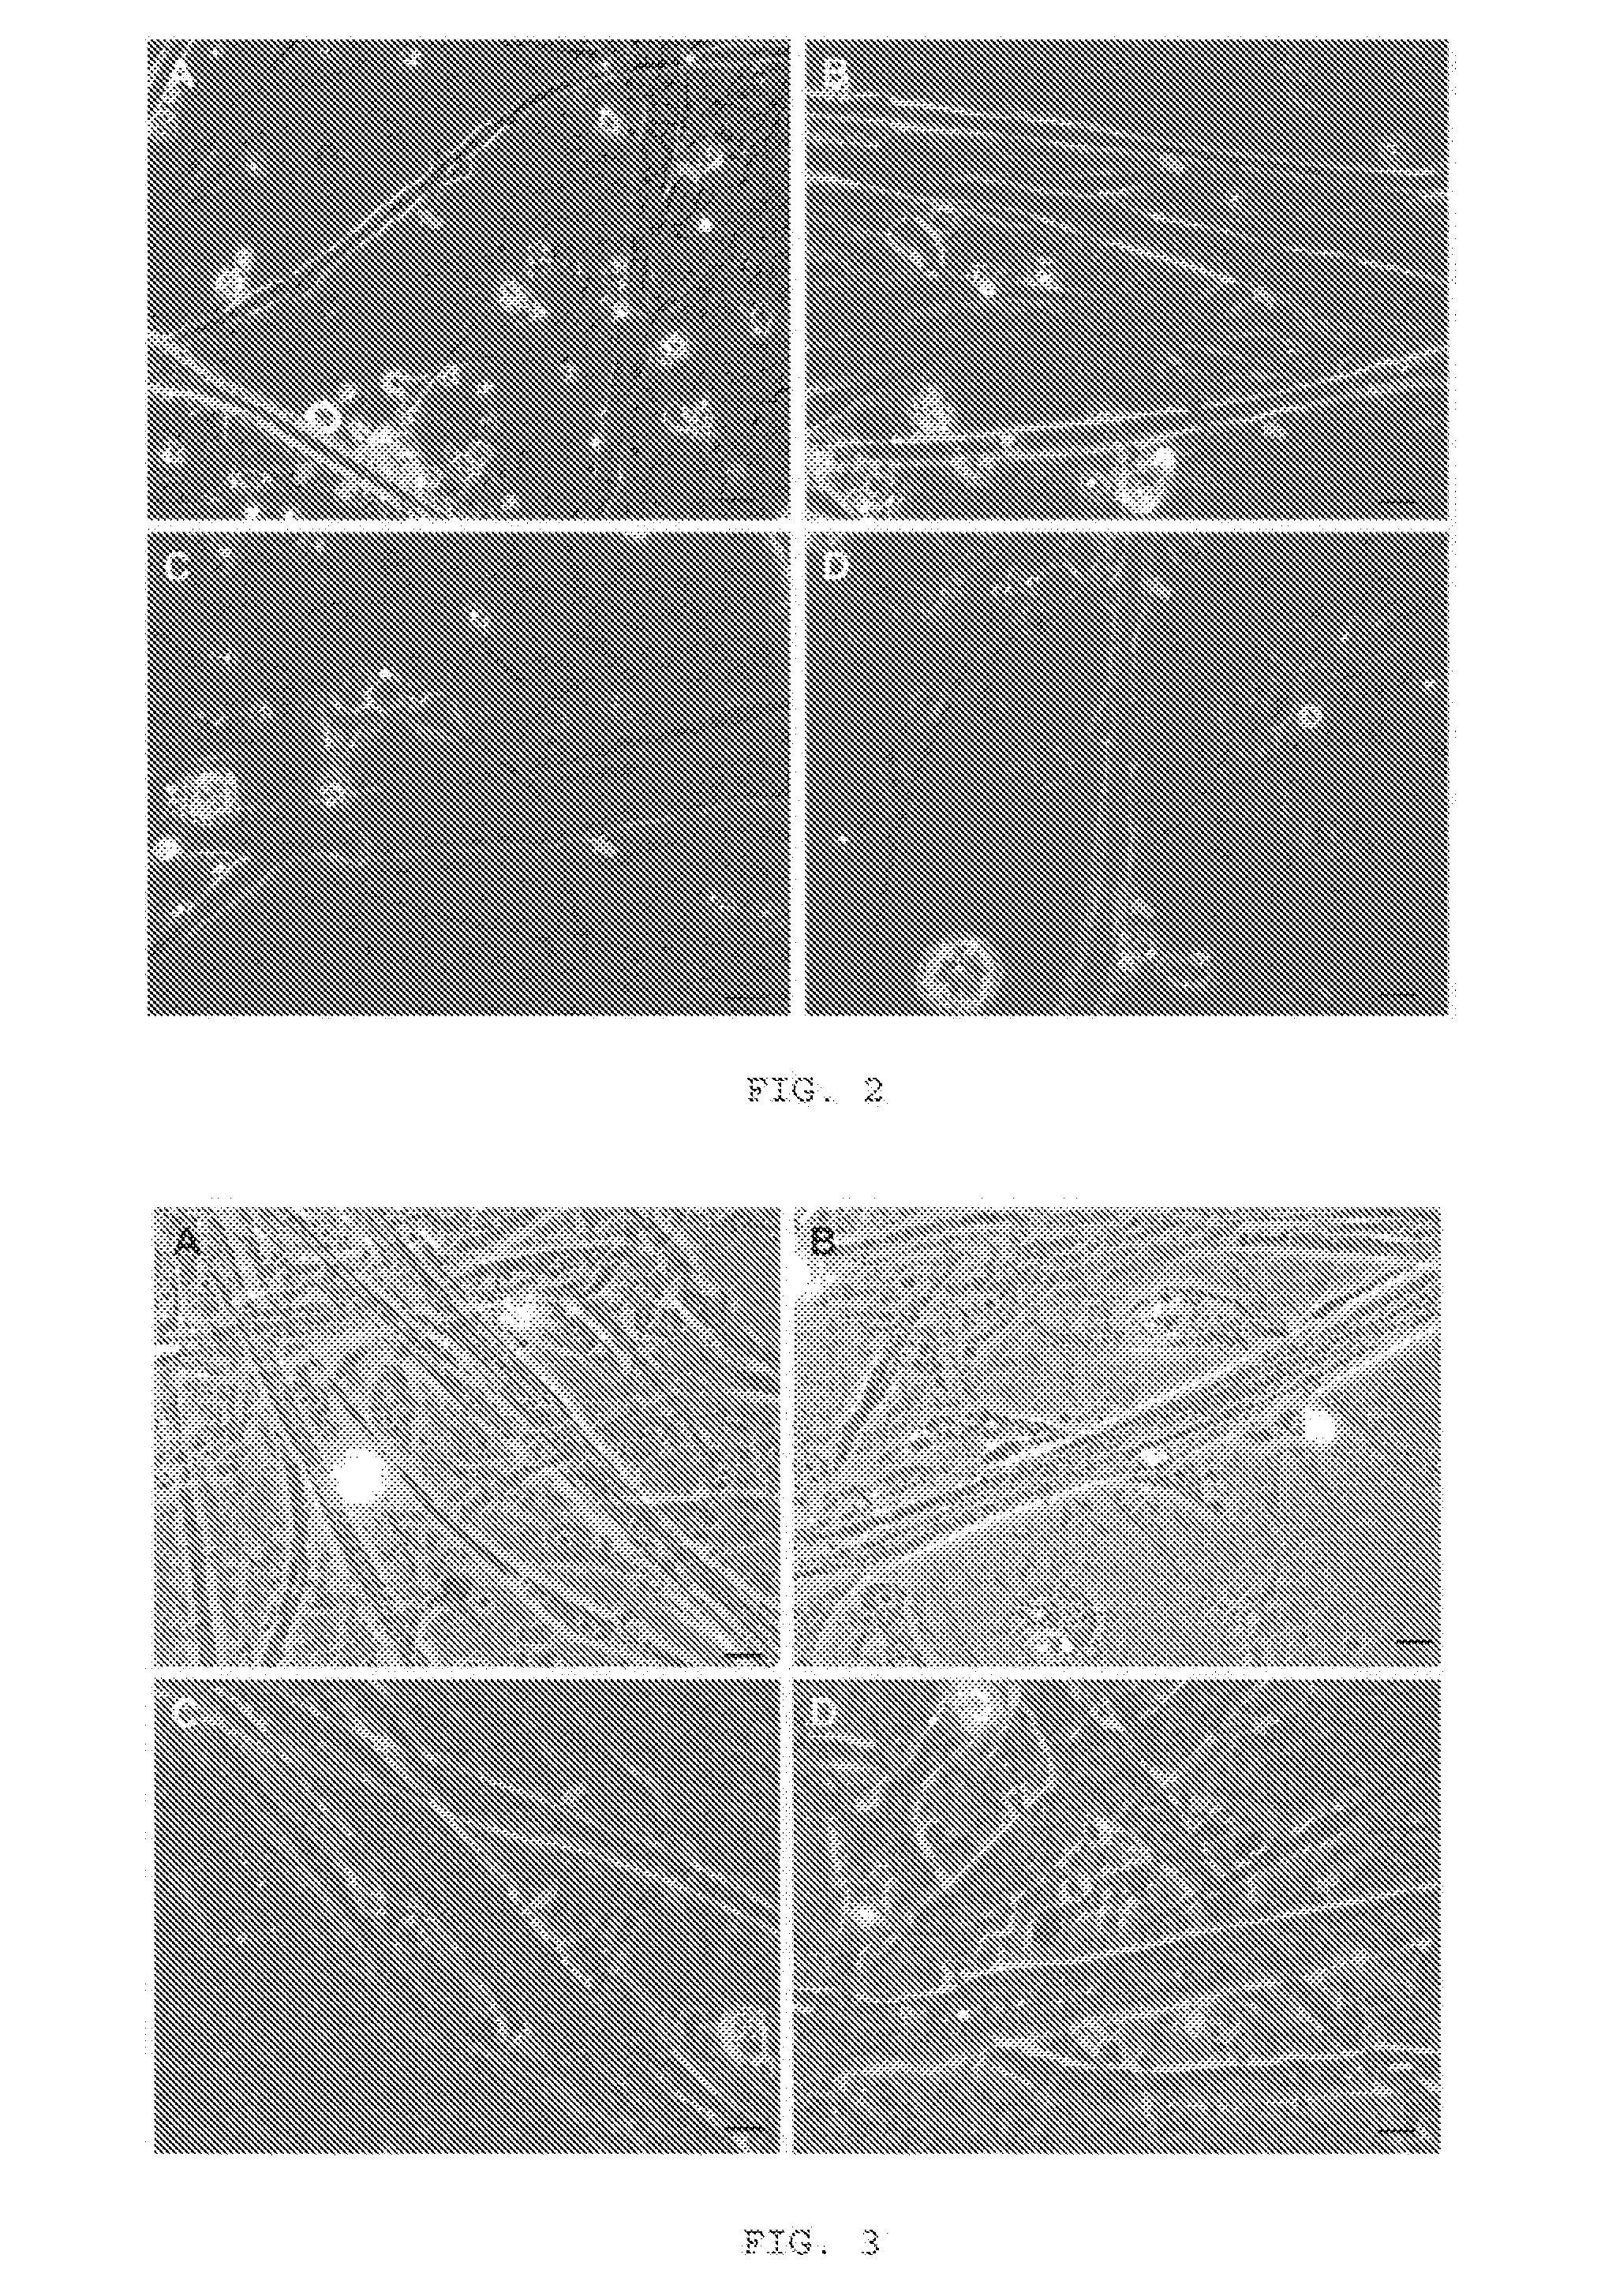 Method of Co-Culturing Mammalian Muscle Cells and Motoneurons